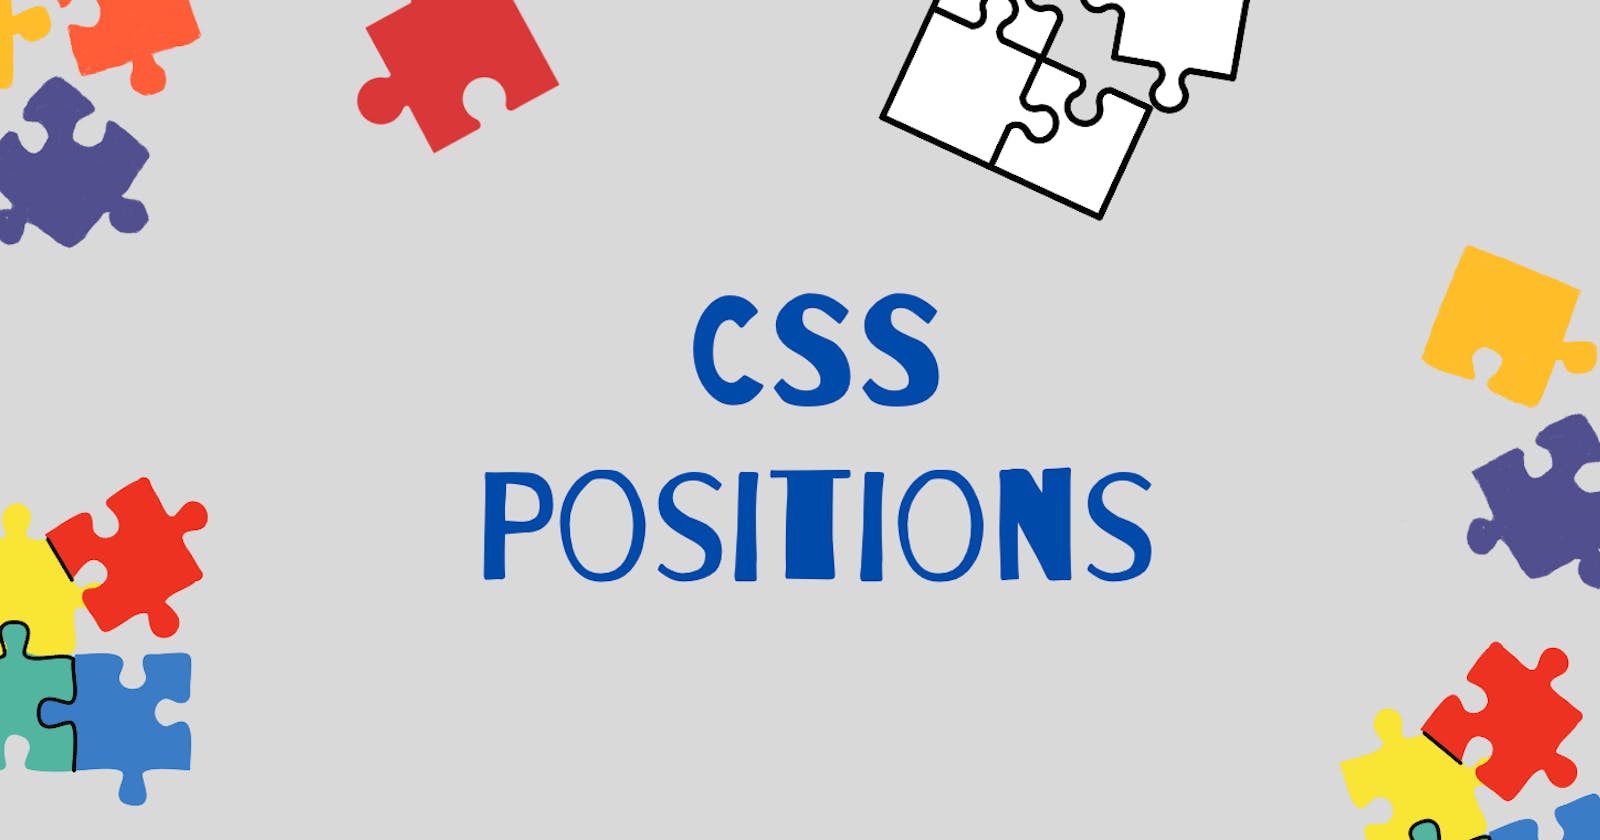 A Quick Guide on CSS Positions